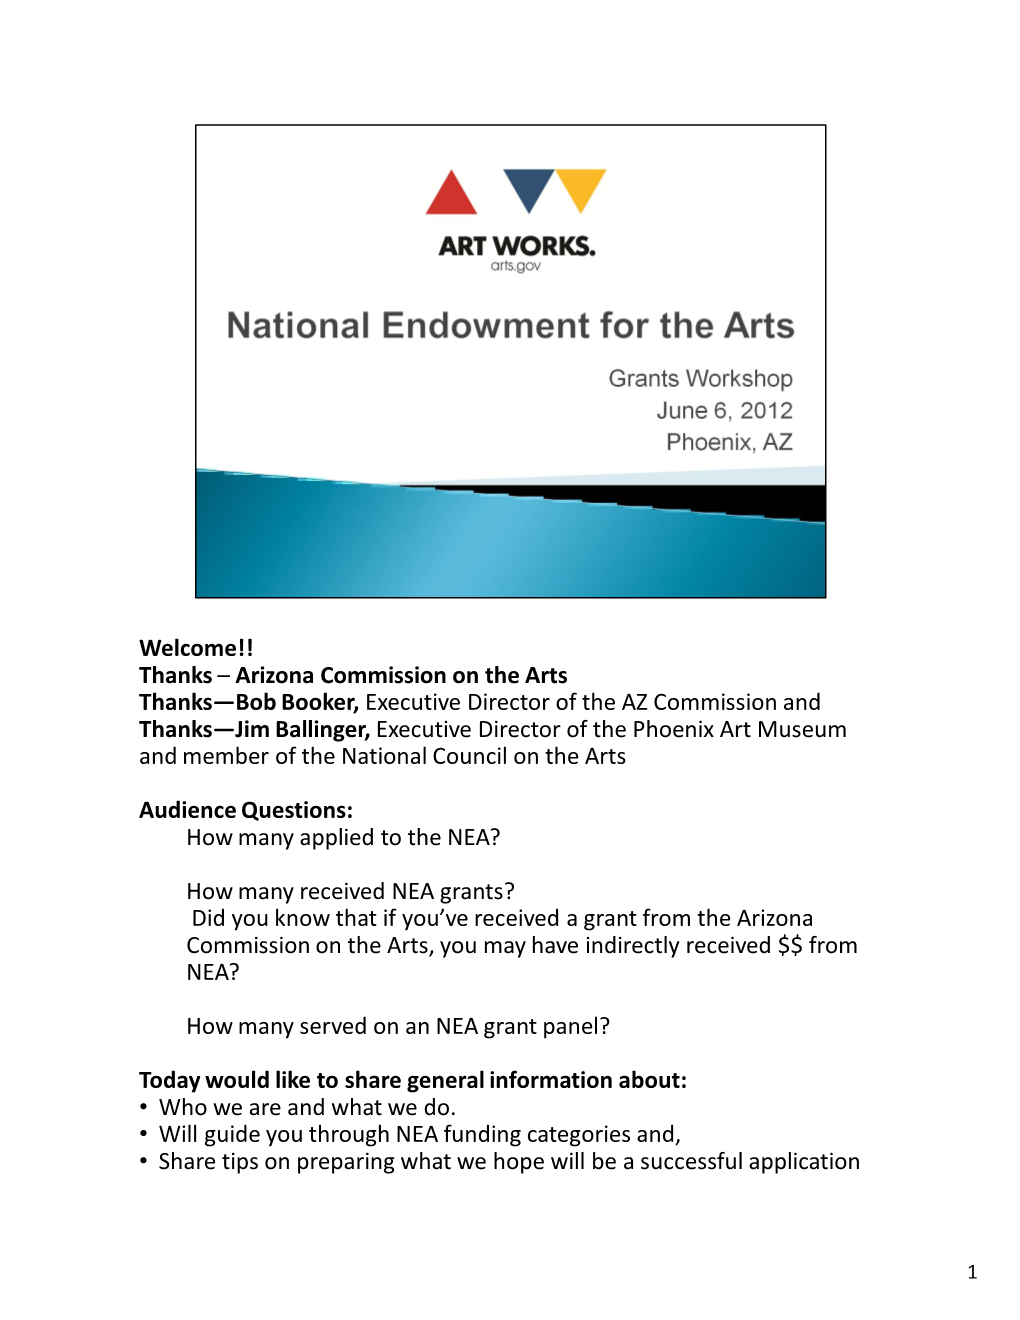 Grants? Did You Know That If You’Ve Received a Grant from the Arizona Commission on the Arts, You May Have Indirectly Received $$ from NEA?